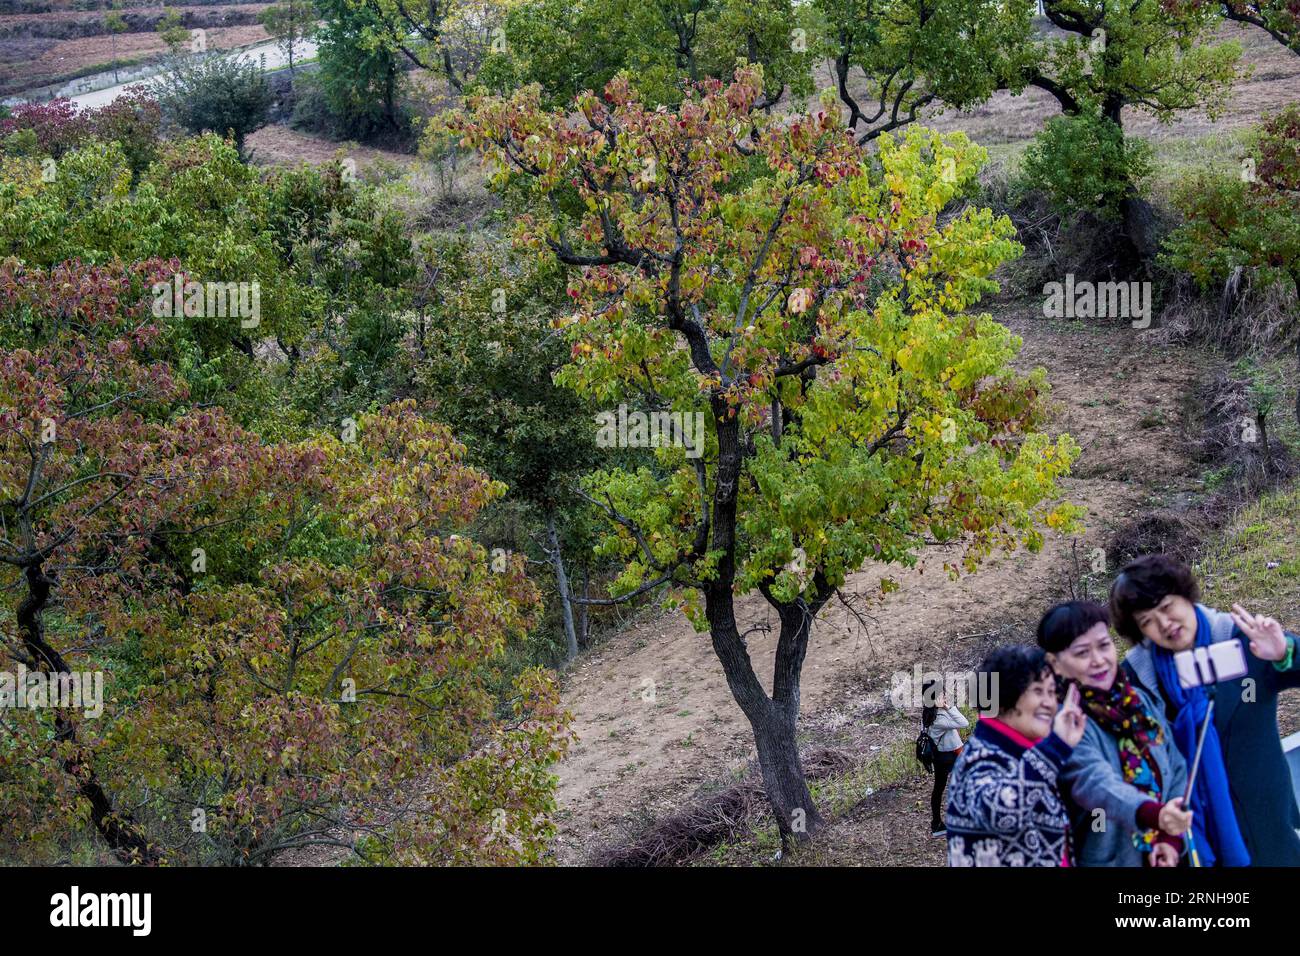 (161103) -- DAWU, Nov. 2, 2016 -- Tourists take photos in front of Chinese tallow trees in Beishan Village of Dawu County, central China s Hubei Province, Nov. 2, 2016. Chinese tallow tree, known as Sapium sebiferum scientifically, is a good material for furniture, and its resin and seeds can produce oil for industrial use.) (wf) CHINA-HUBEI-CHINESE TALLOW TREE (CN) DuxHuaju PUBLICATIONxNOTxINxCHN   Dawu Nov 2 2016 tourists Take Photos in Front of Chinese tallow Trees in Beishan Village of Dawu County Central China S Hubei Province Nov 2 2016 Chinese tallow Tree known As Sapium sebiferum scien Stock Photo